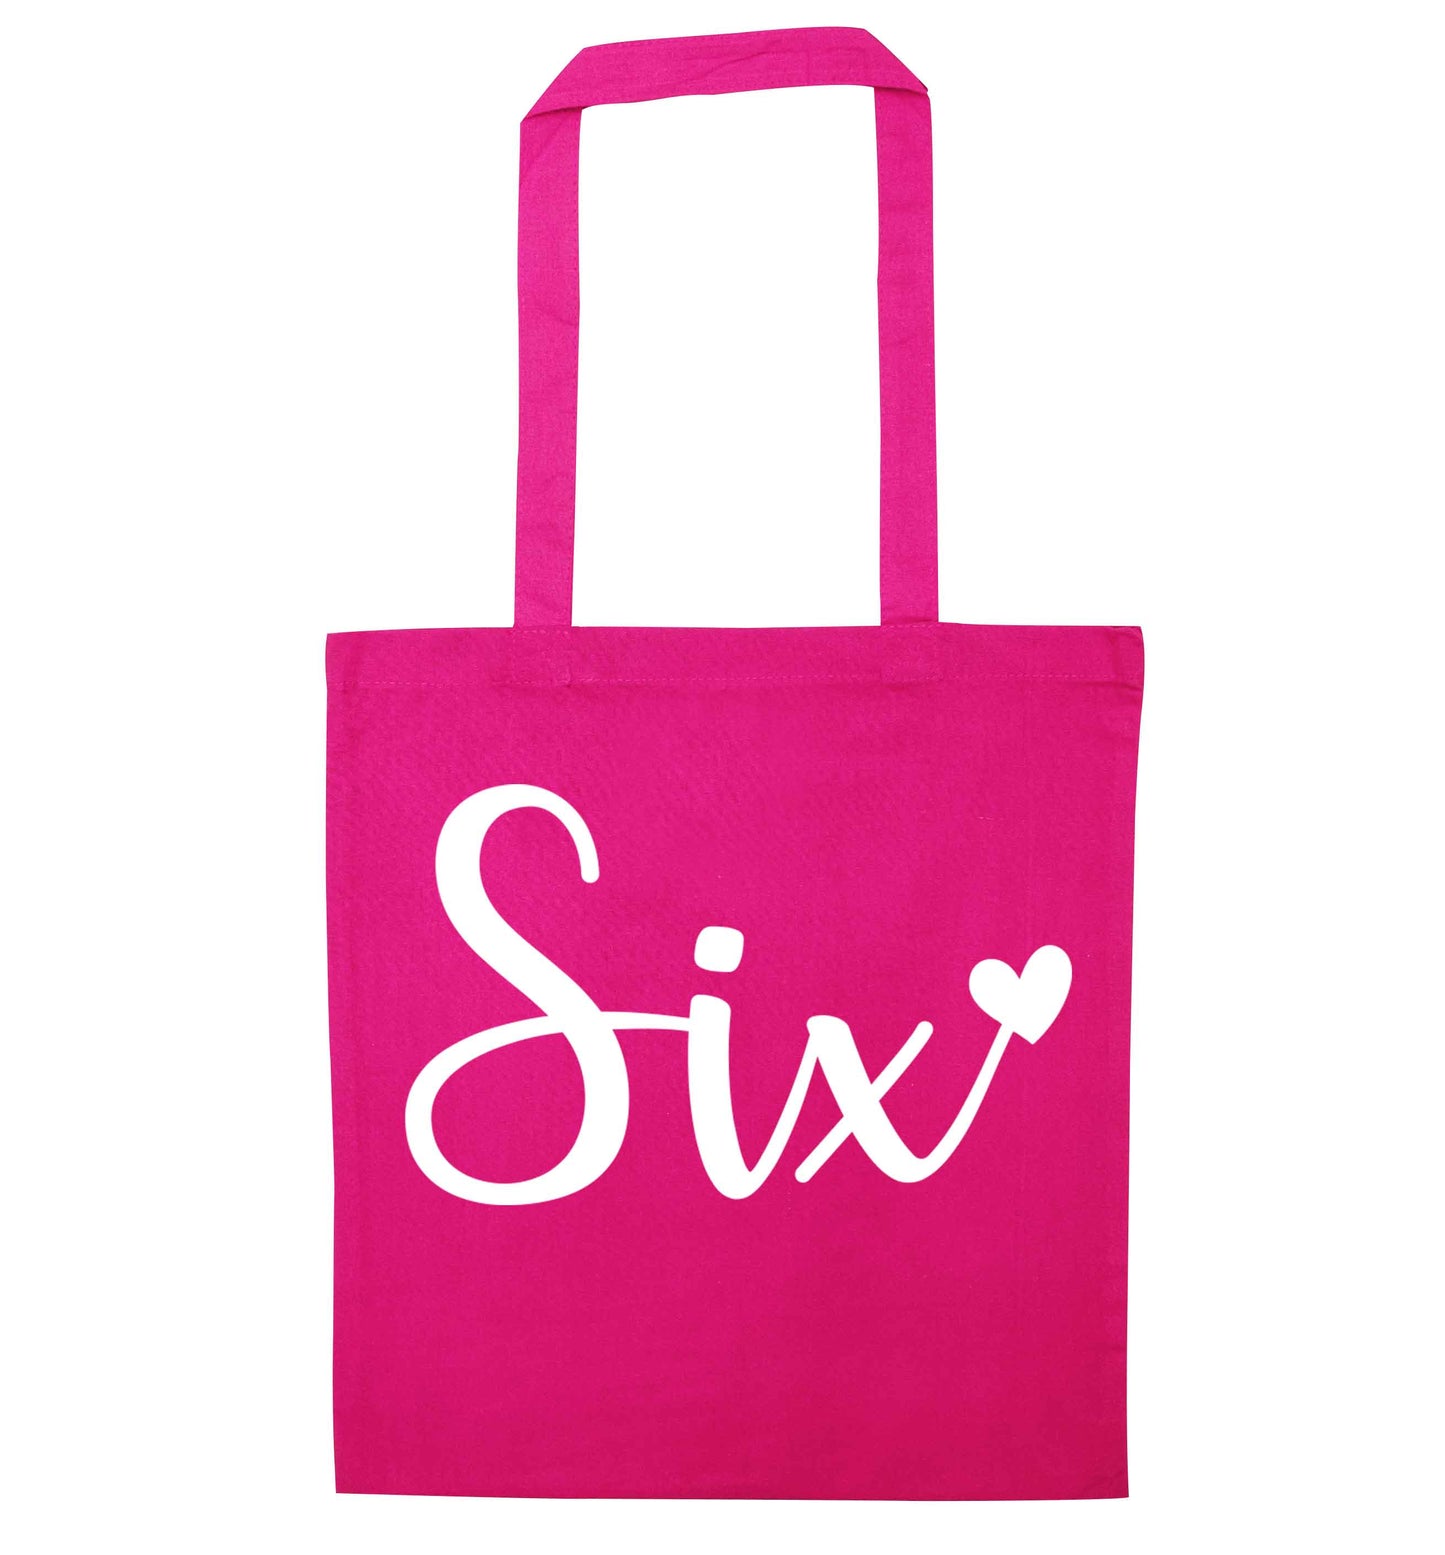 Six and heart! pink tote bag